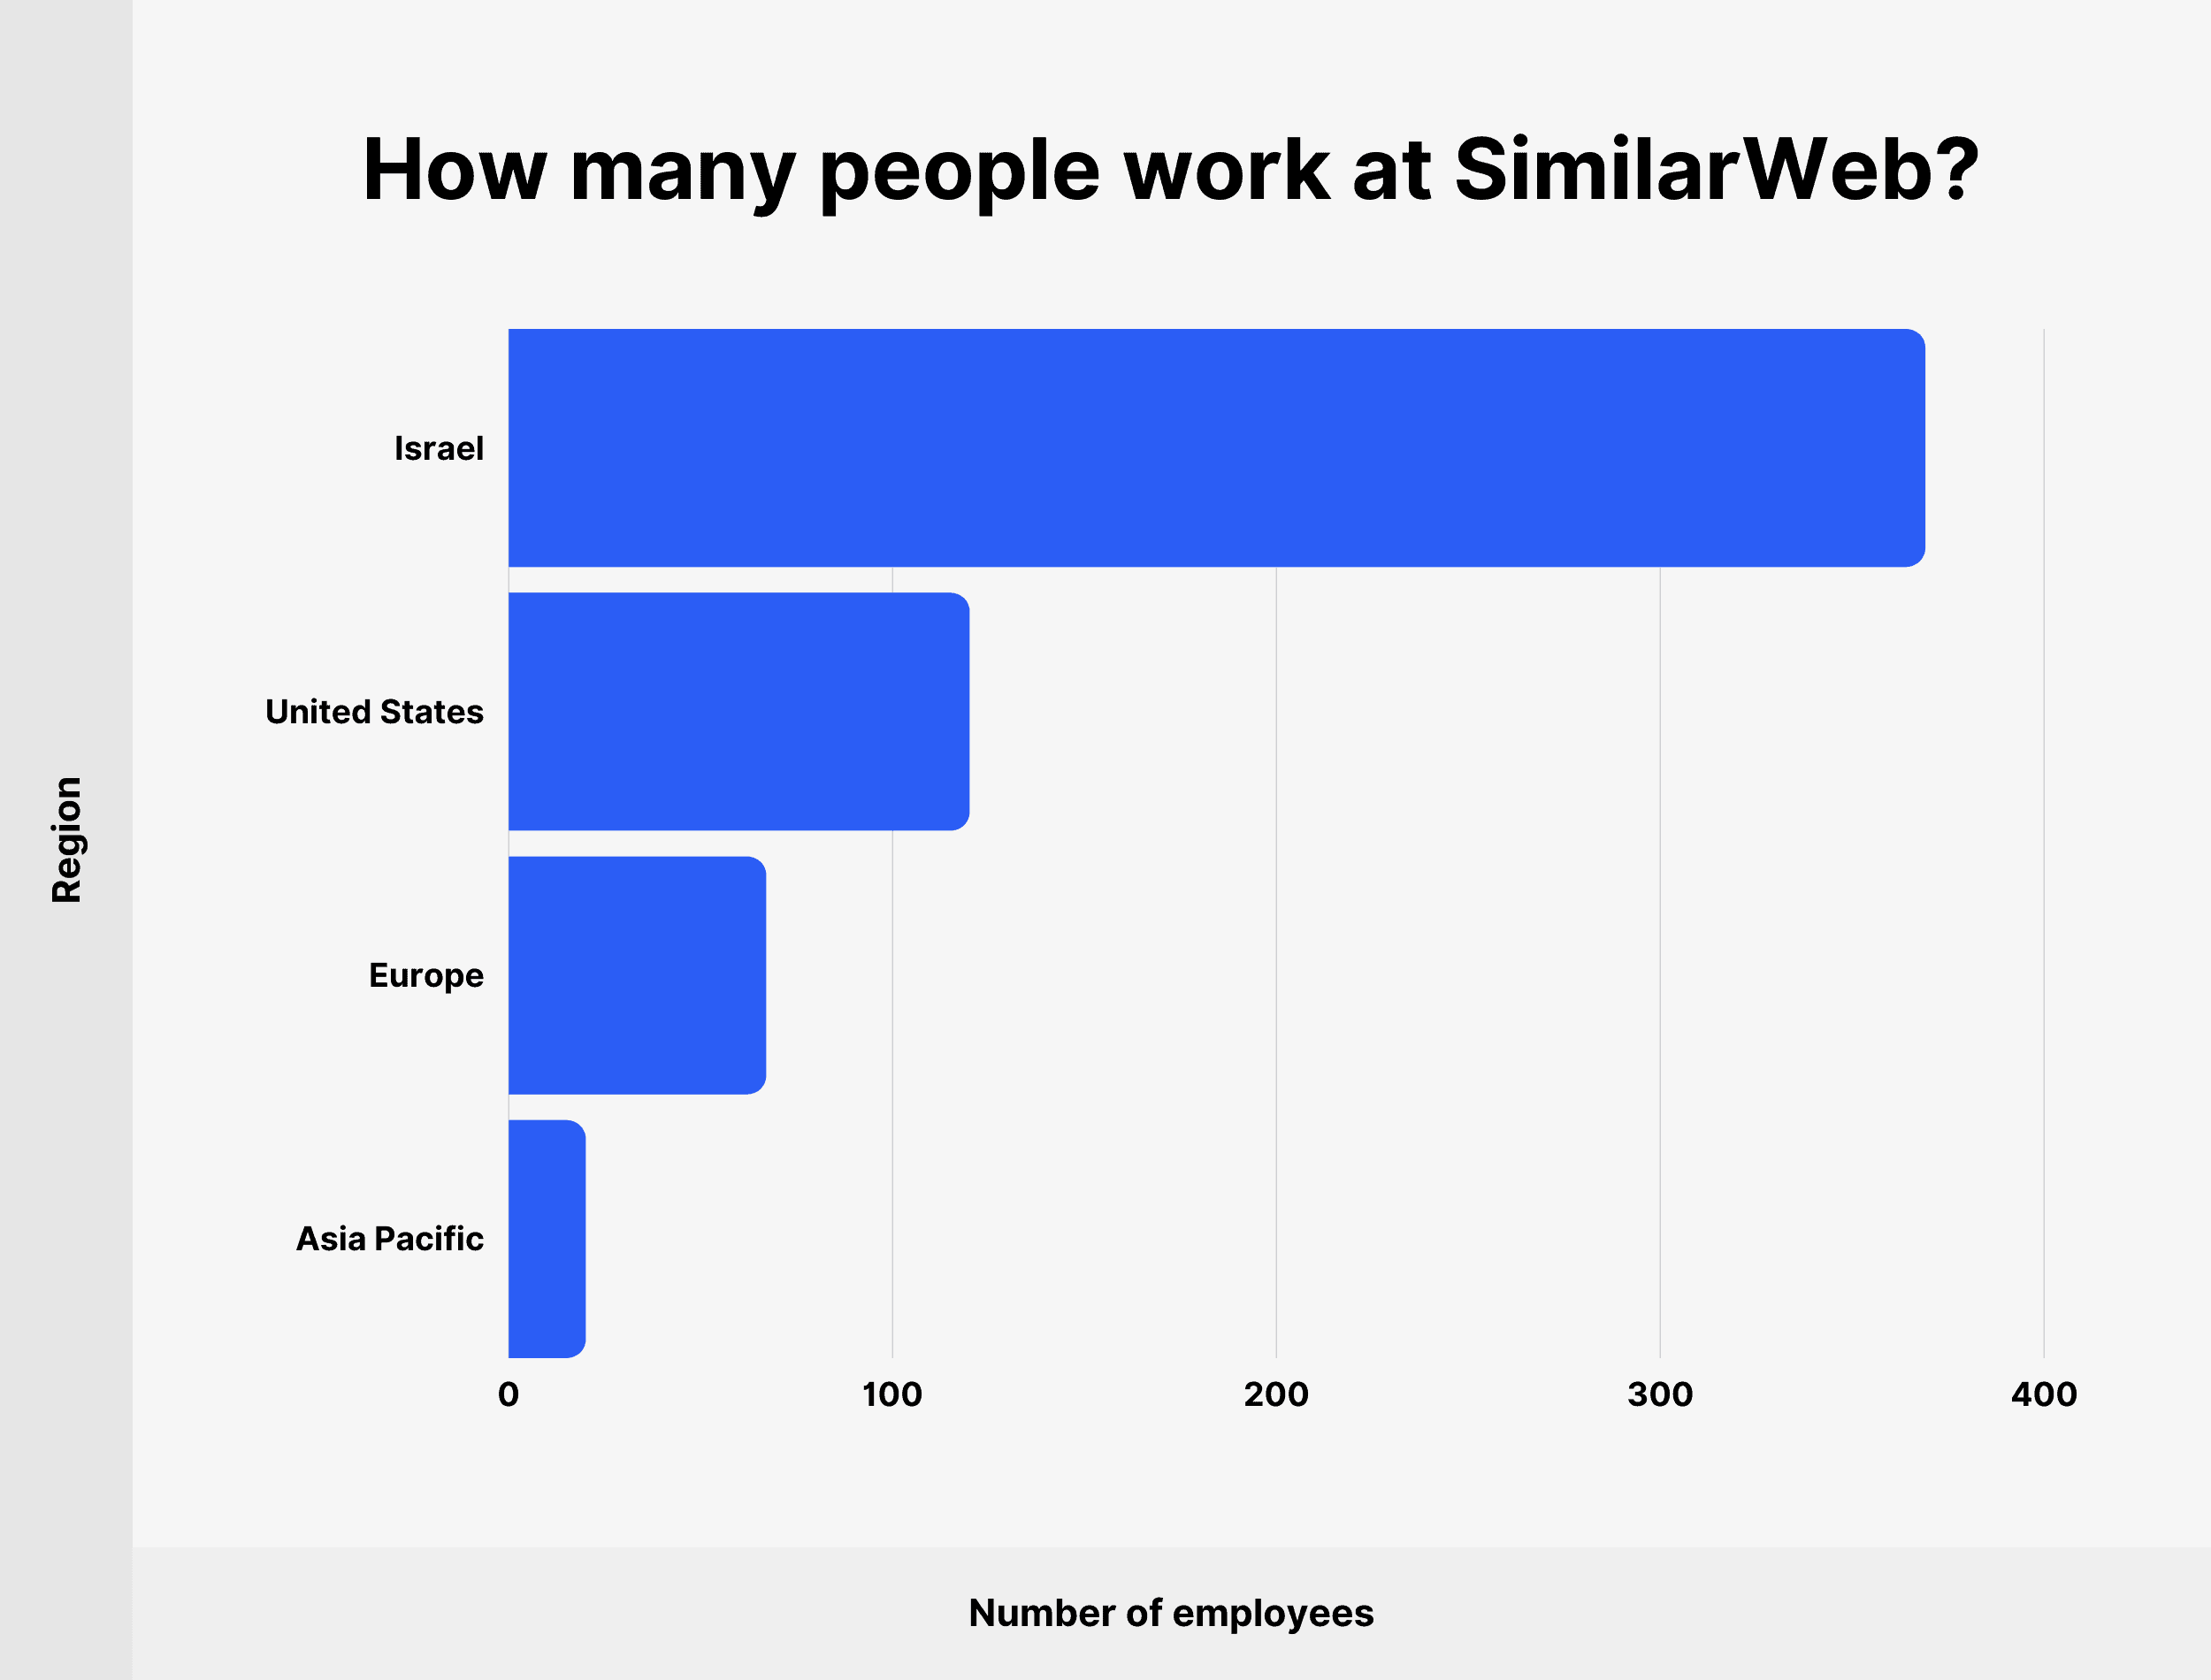 How many people work at SimilarWeb?